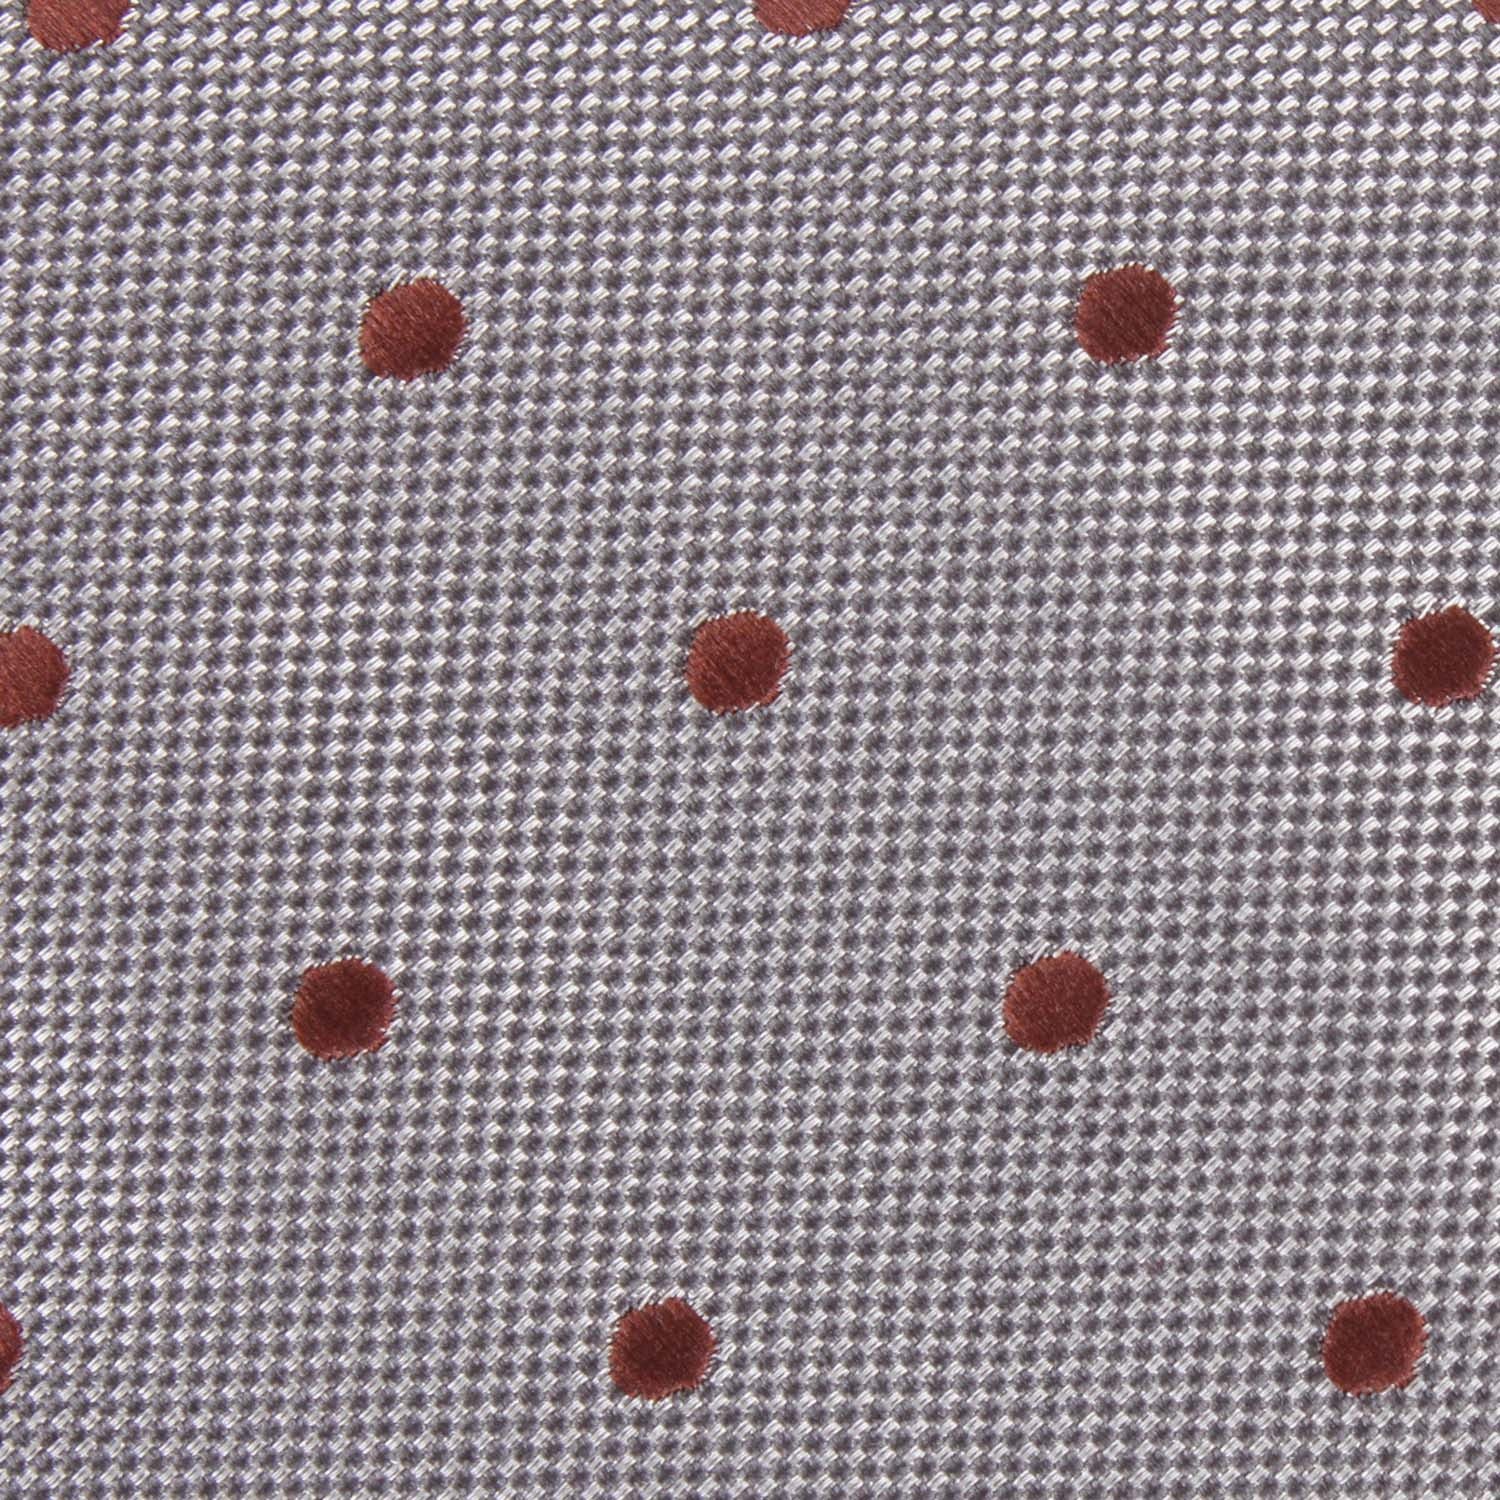 Grey with Brown Polka Dots Fabric Pocket Square M119